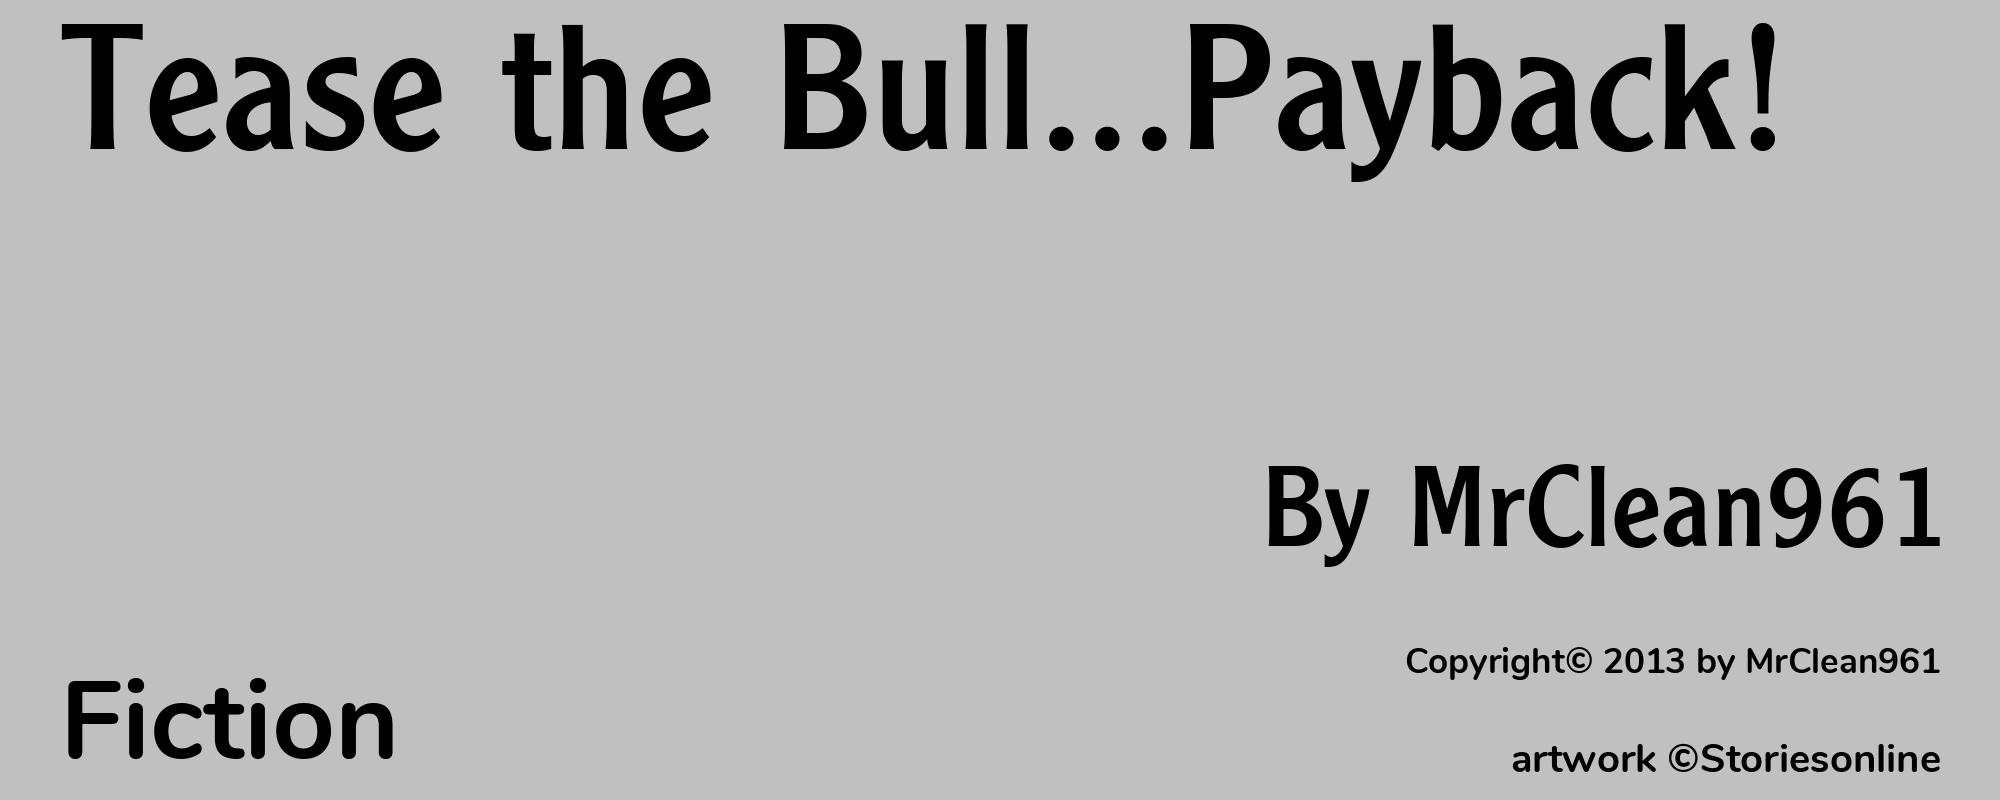 Tease the Bull...Payback! - Cover